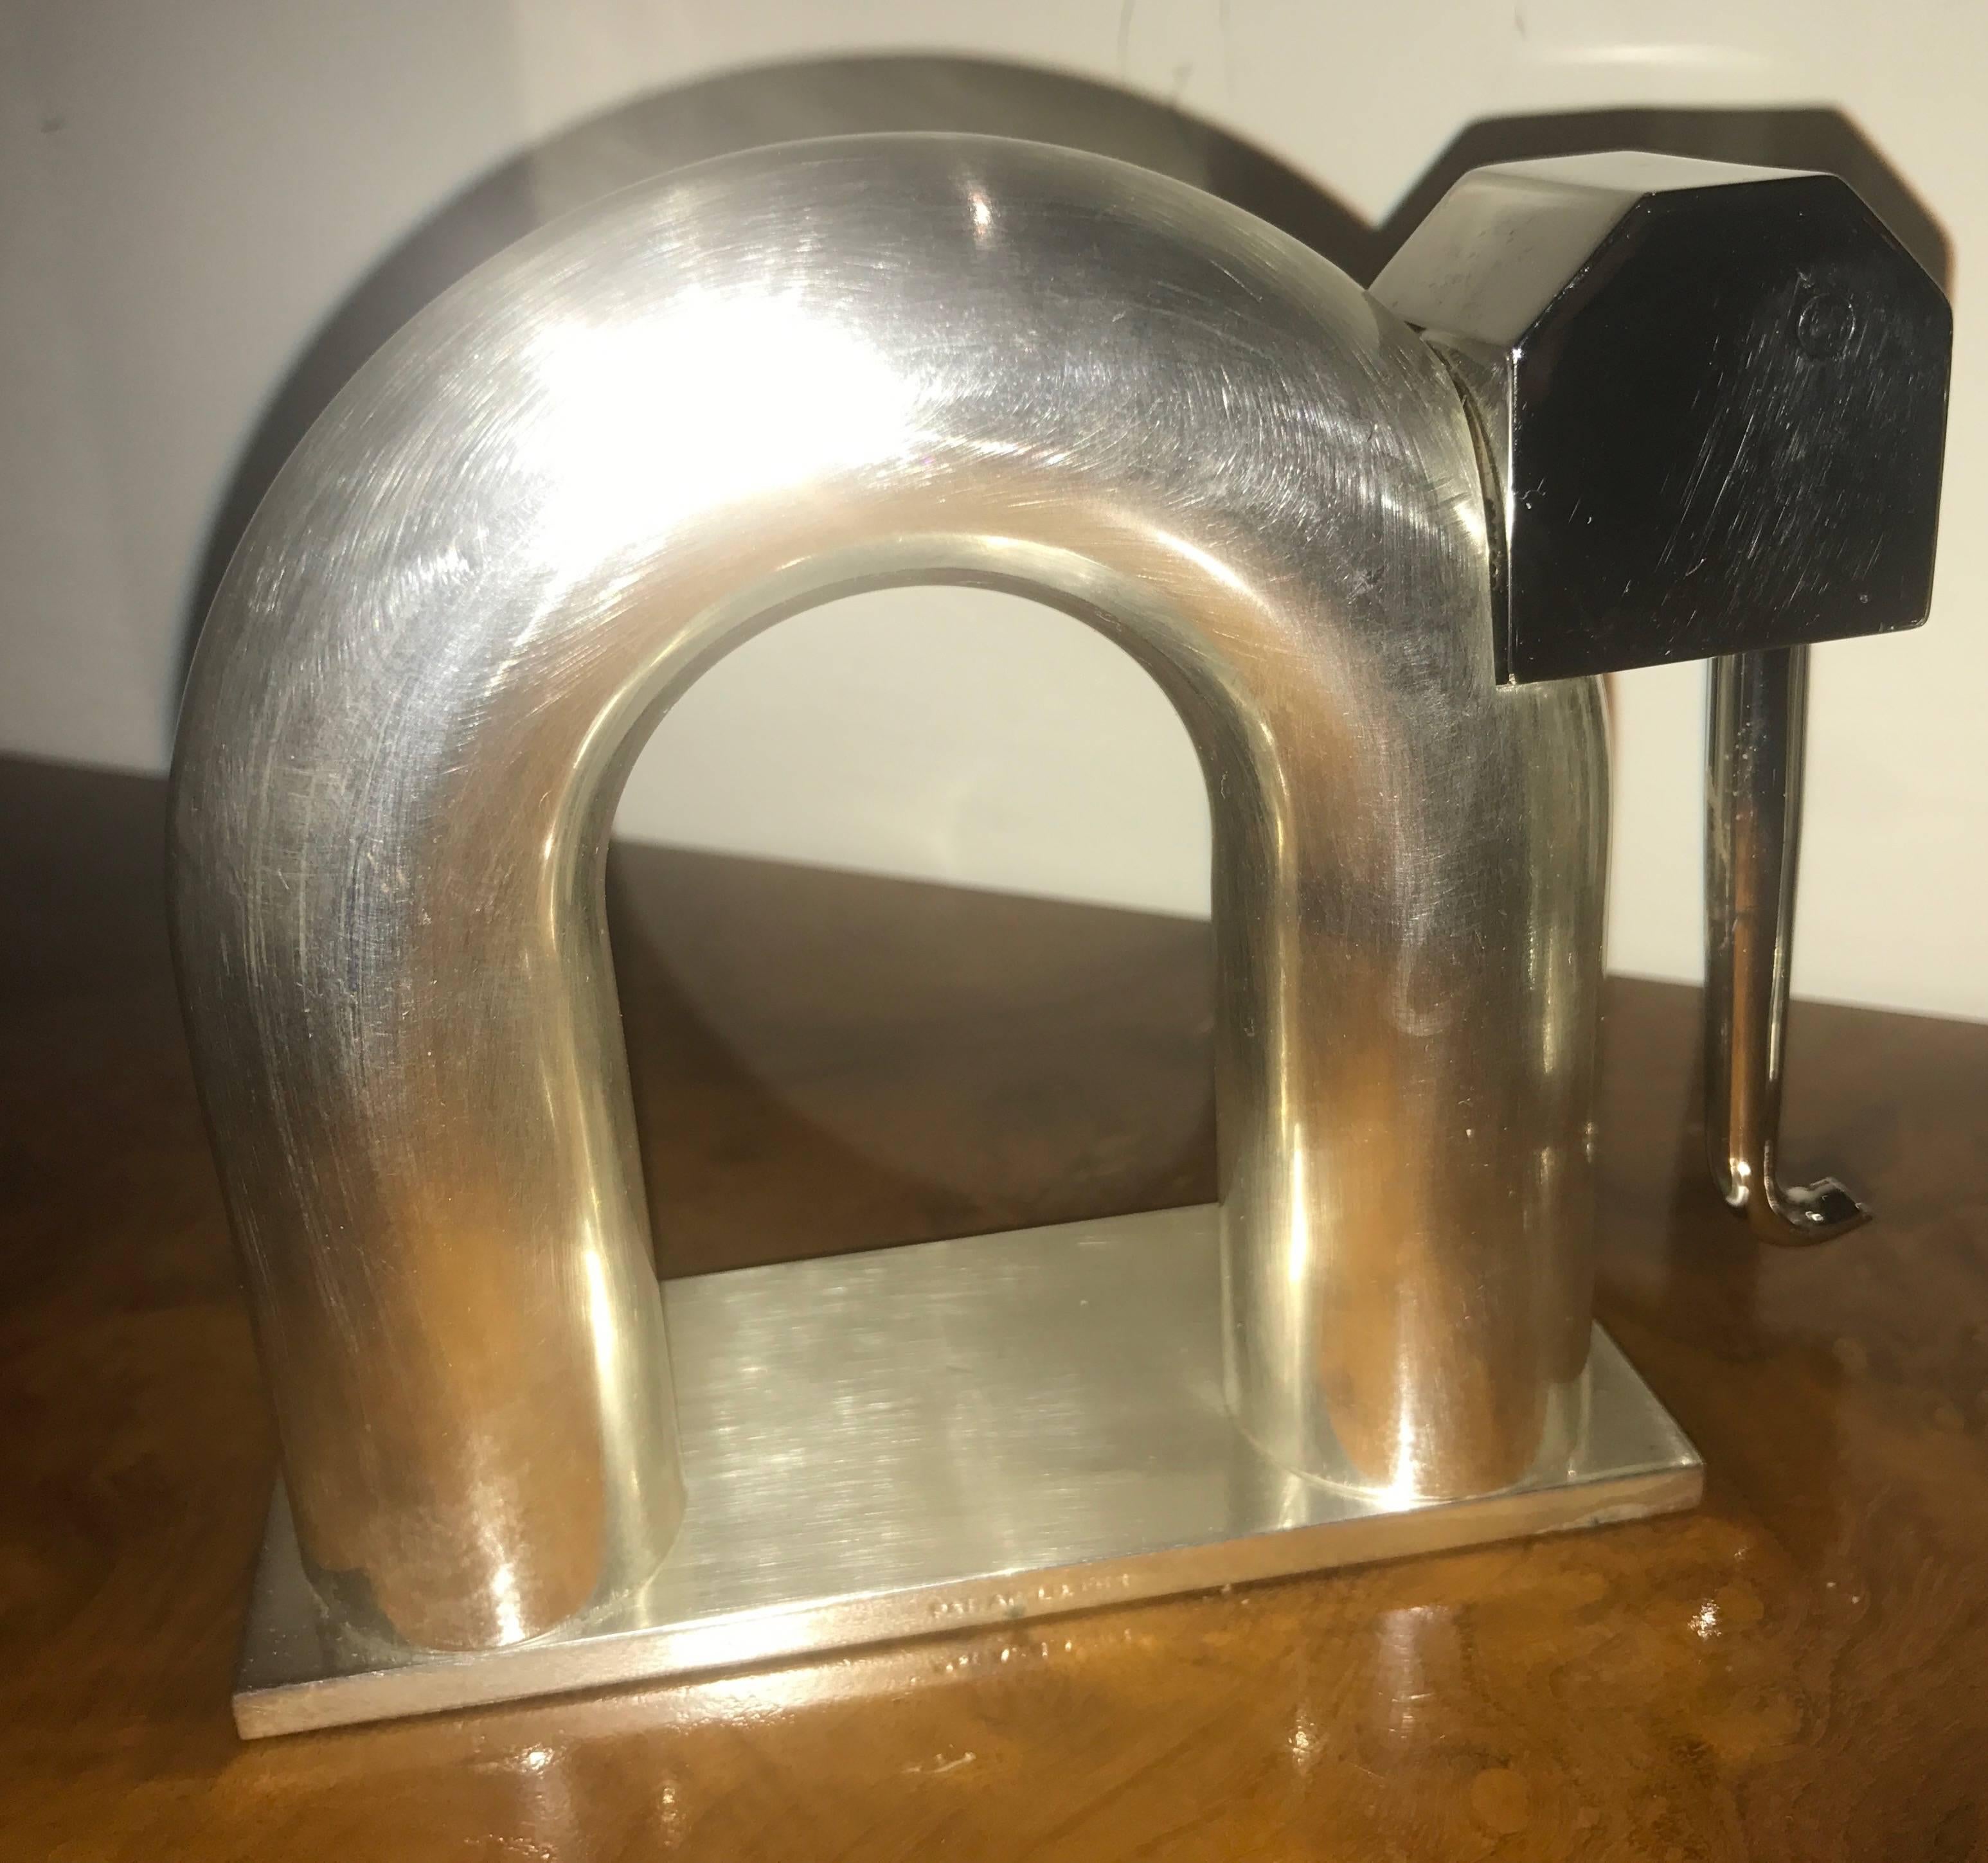 Chase nickel-plated brass elephant bookends. Unusual finish with satin nickel body and polished nickel head and trunk. Important design by famous Industrial Design Pioneer Walter Von Nessen who worked for Chase and designed many of the company’s